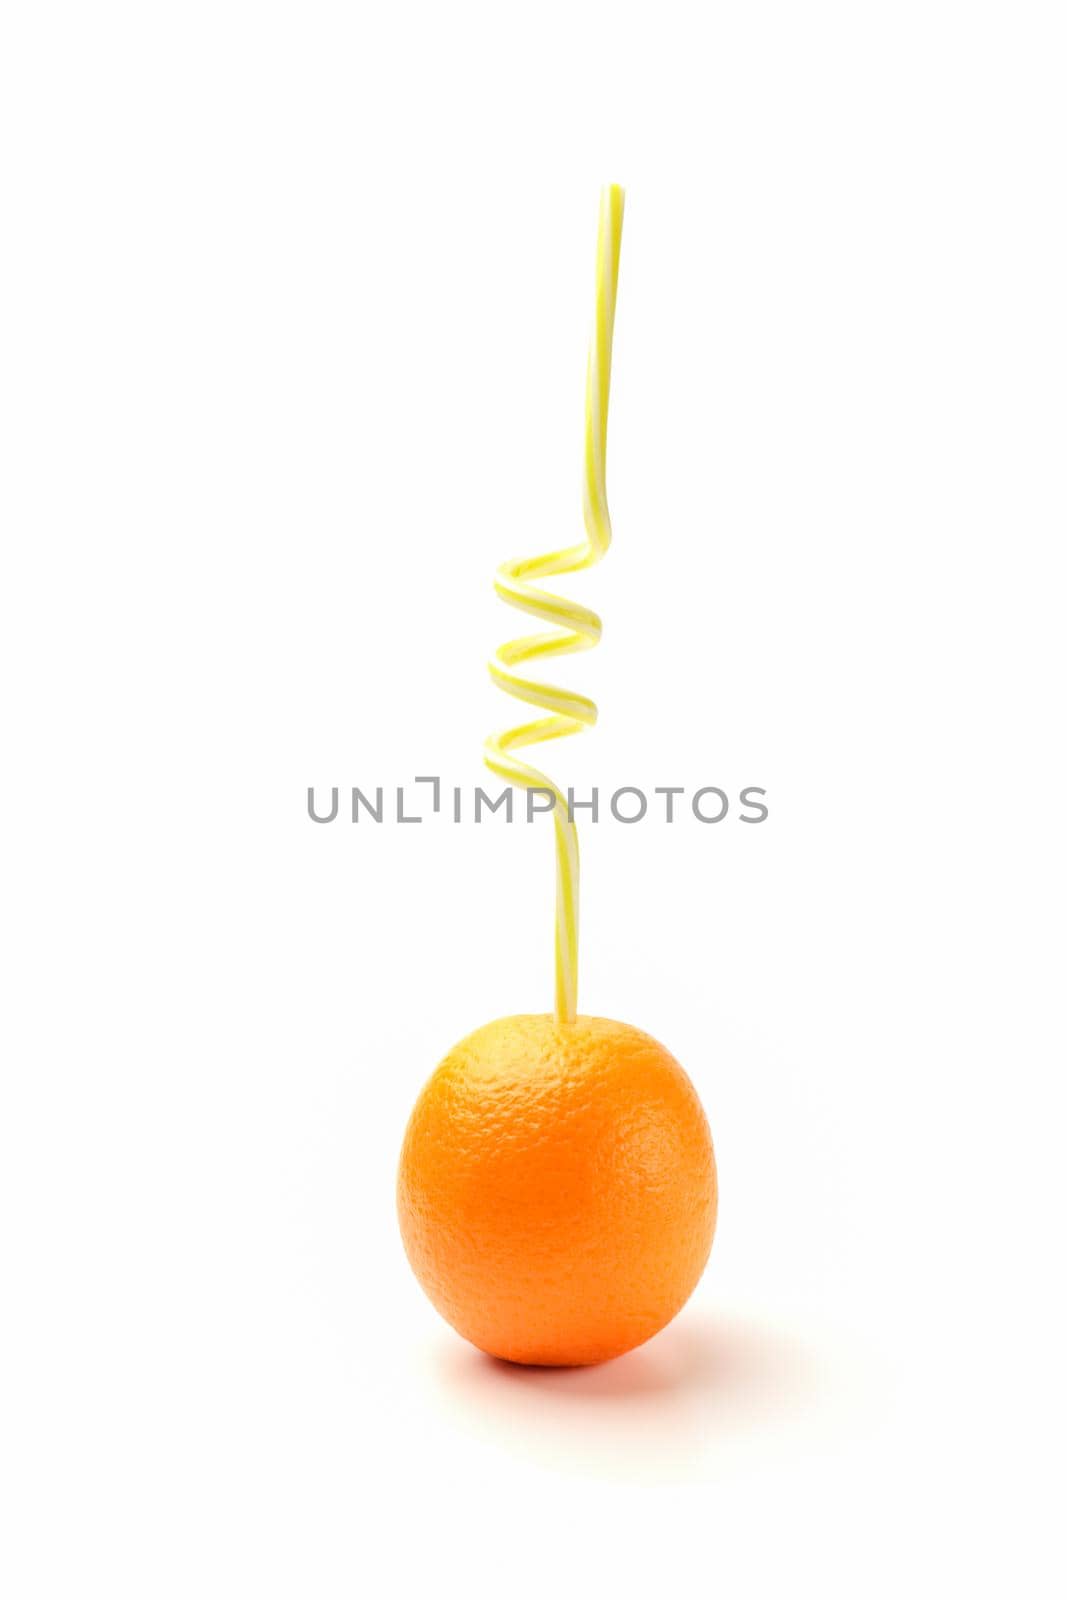 orange with a tube on a white background isolate macro. High quality photo